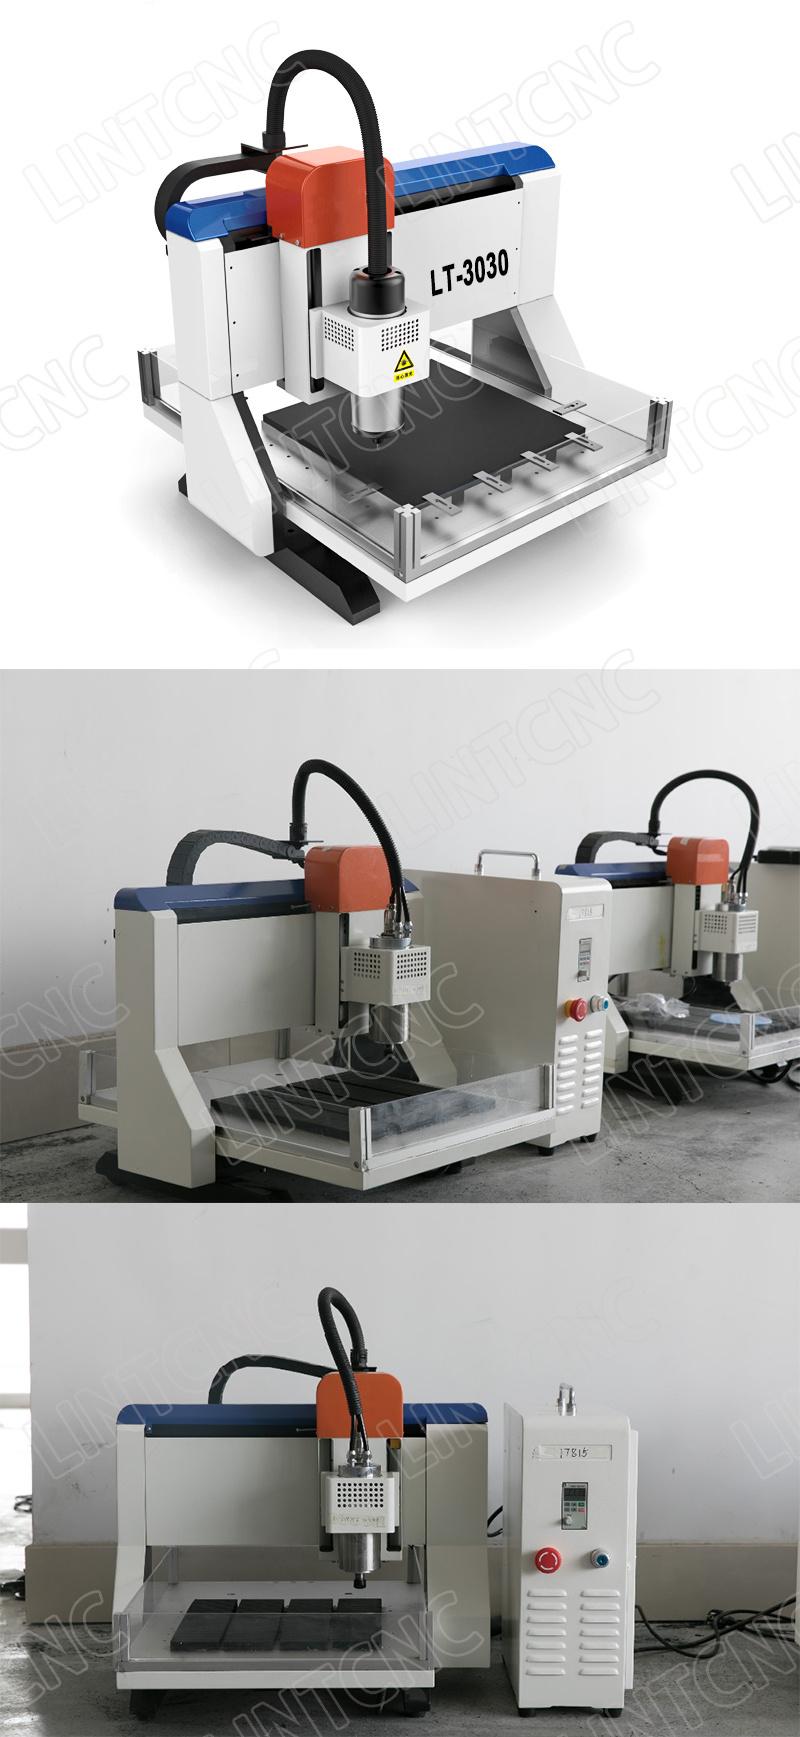 China Customized Cheap 3030 4040 Mini Desktop CNC Router DSP for Acrylic Wood Plastic